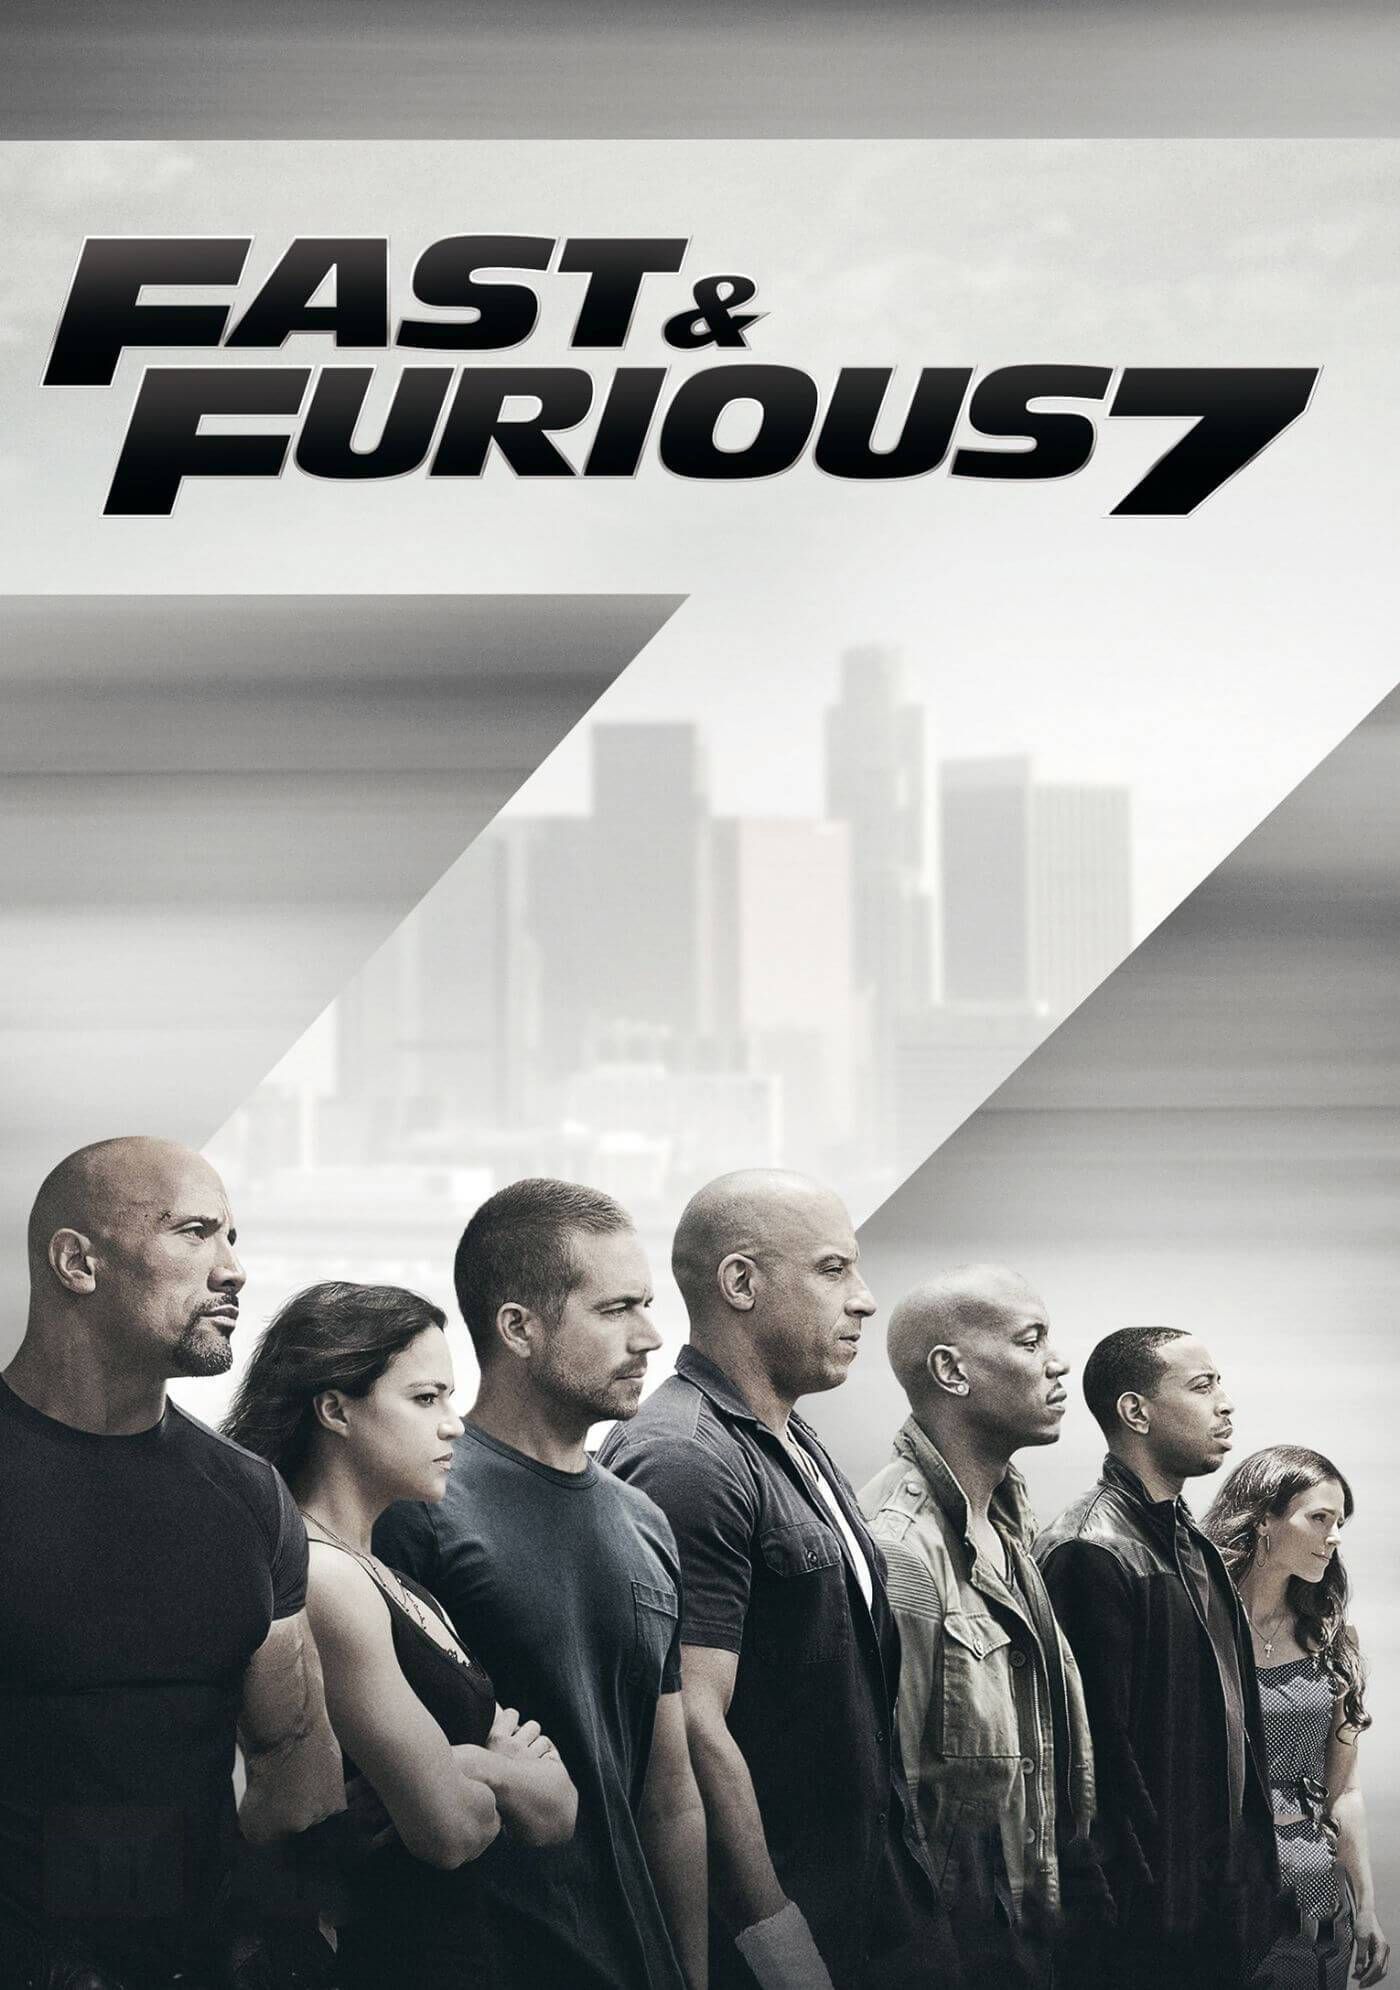 Fast and Furious' Movies in Order - Fast and Furious Timeline